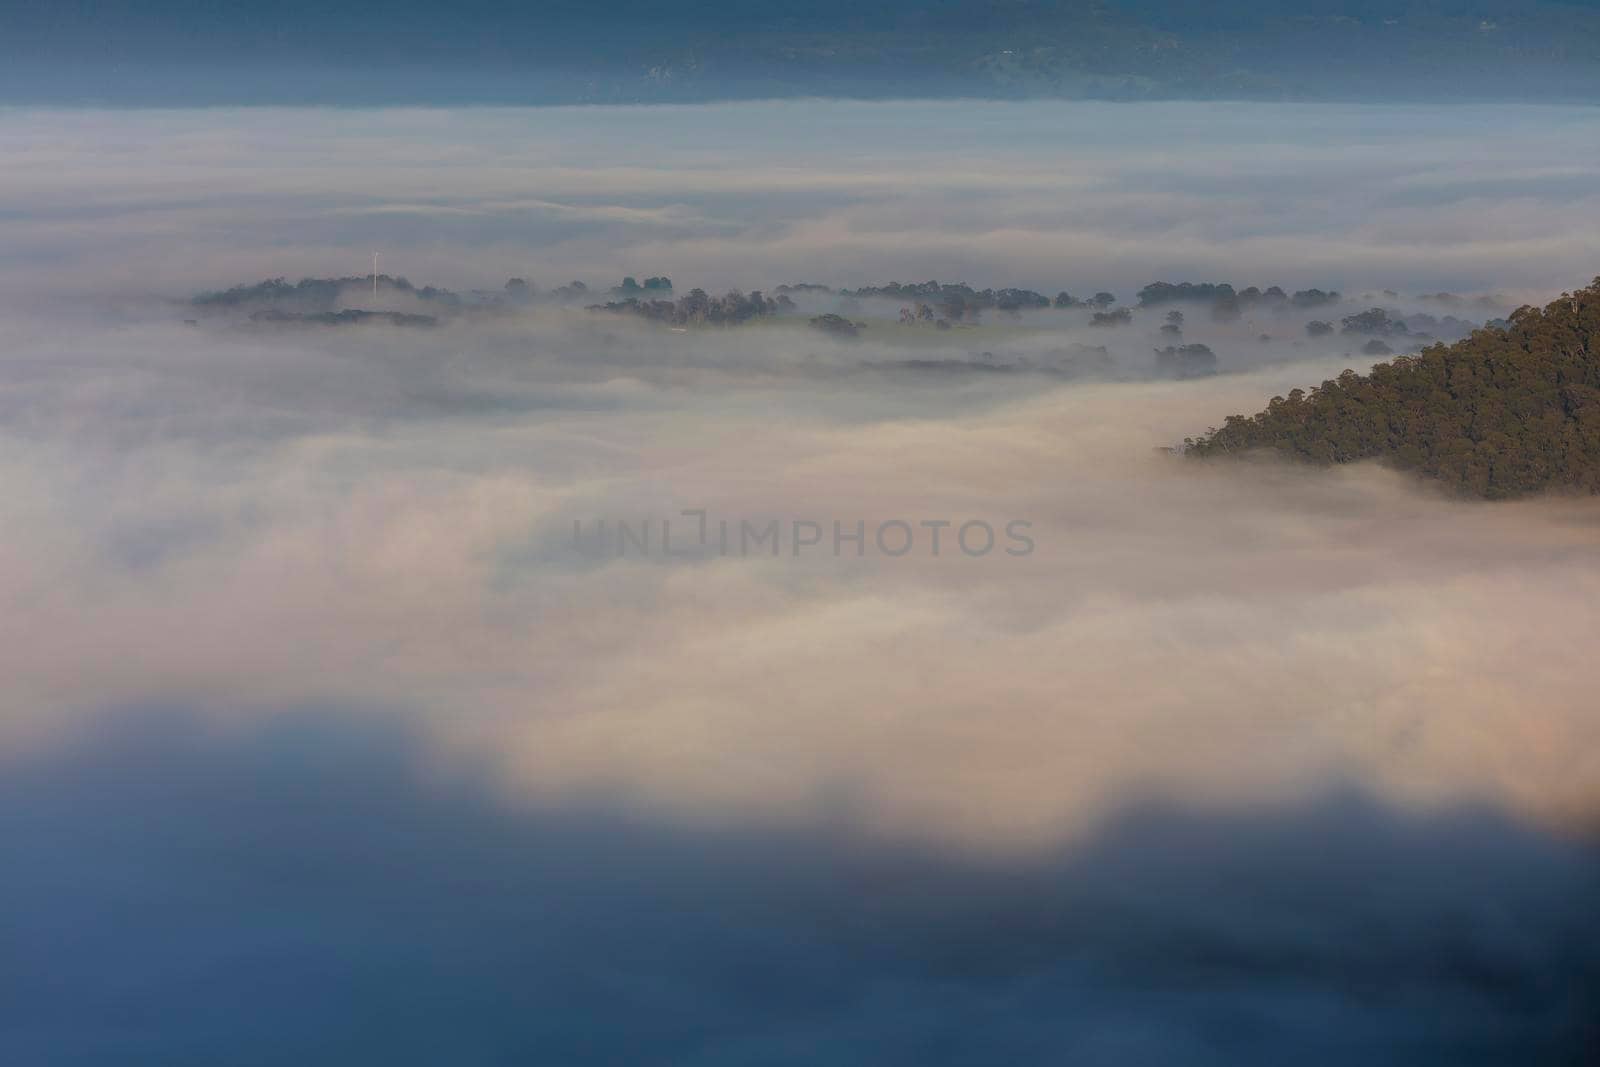 Fog in the Megalong Valley in The Blue Mountains in Australia by WittkePhotos